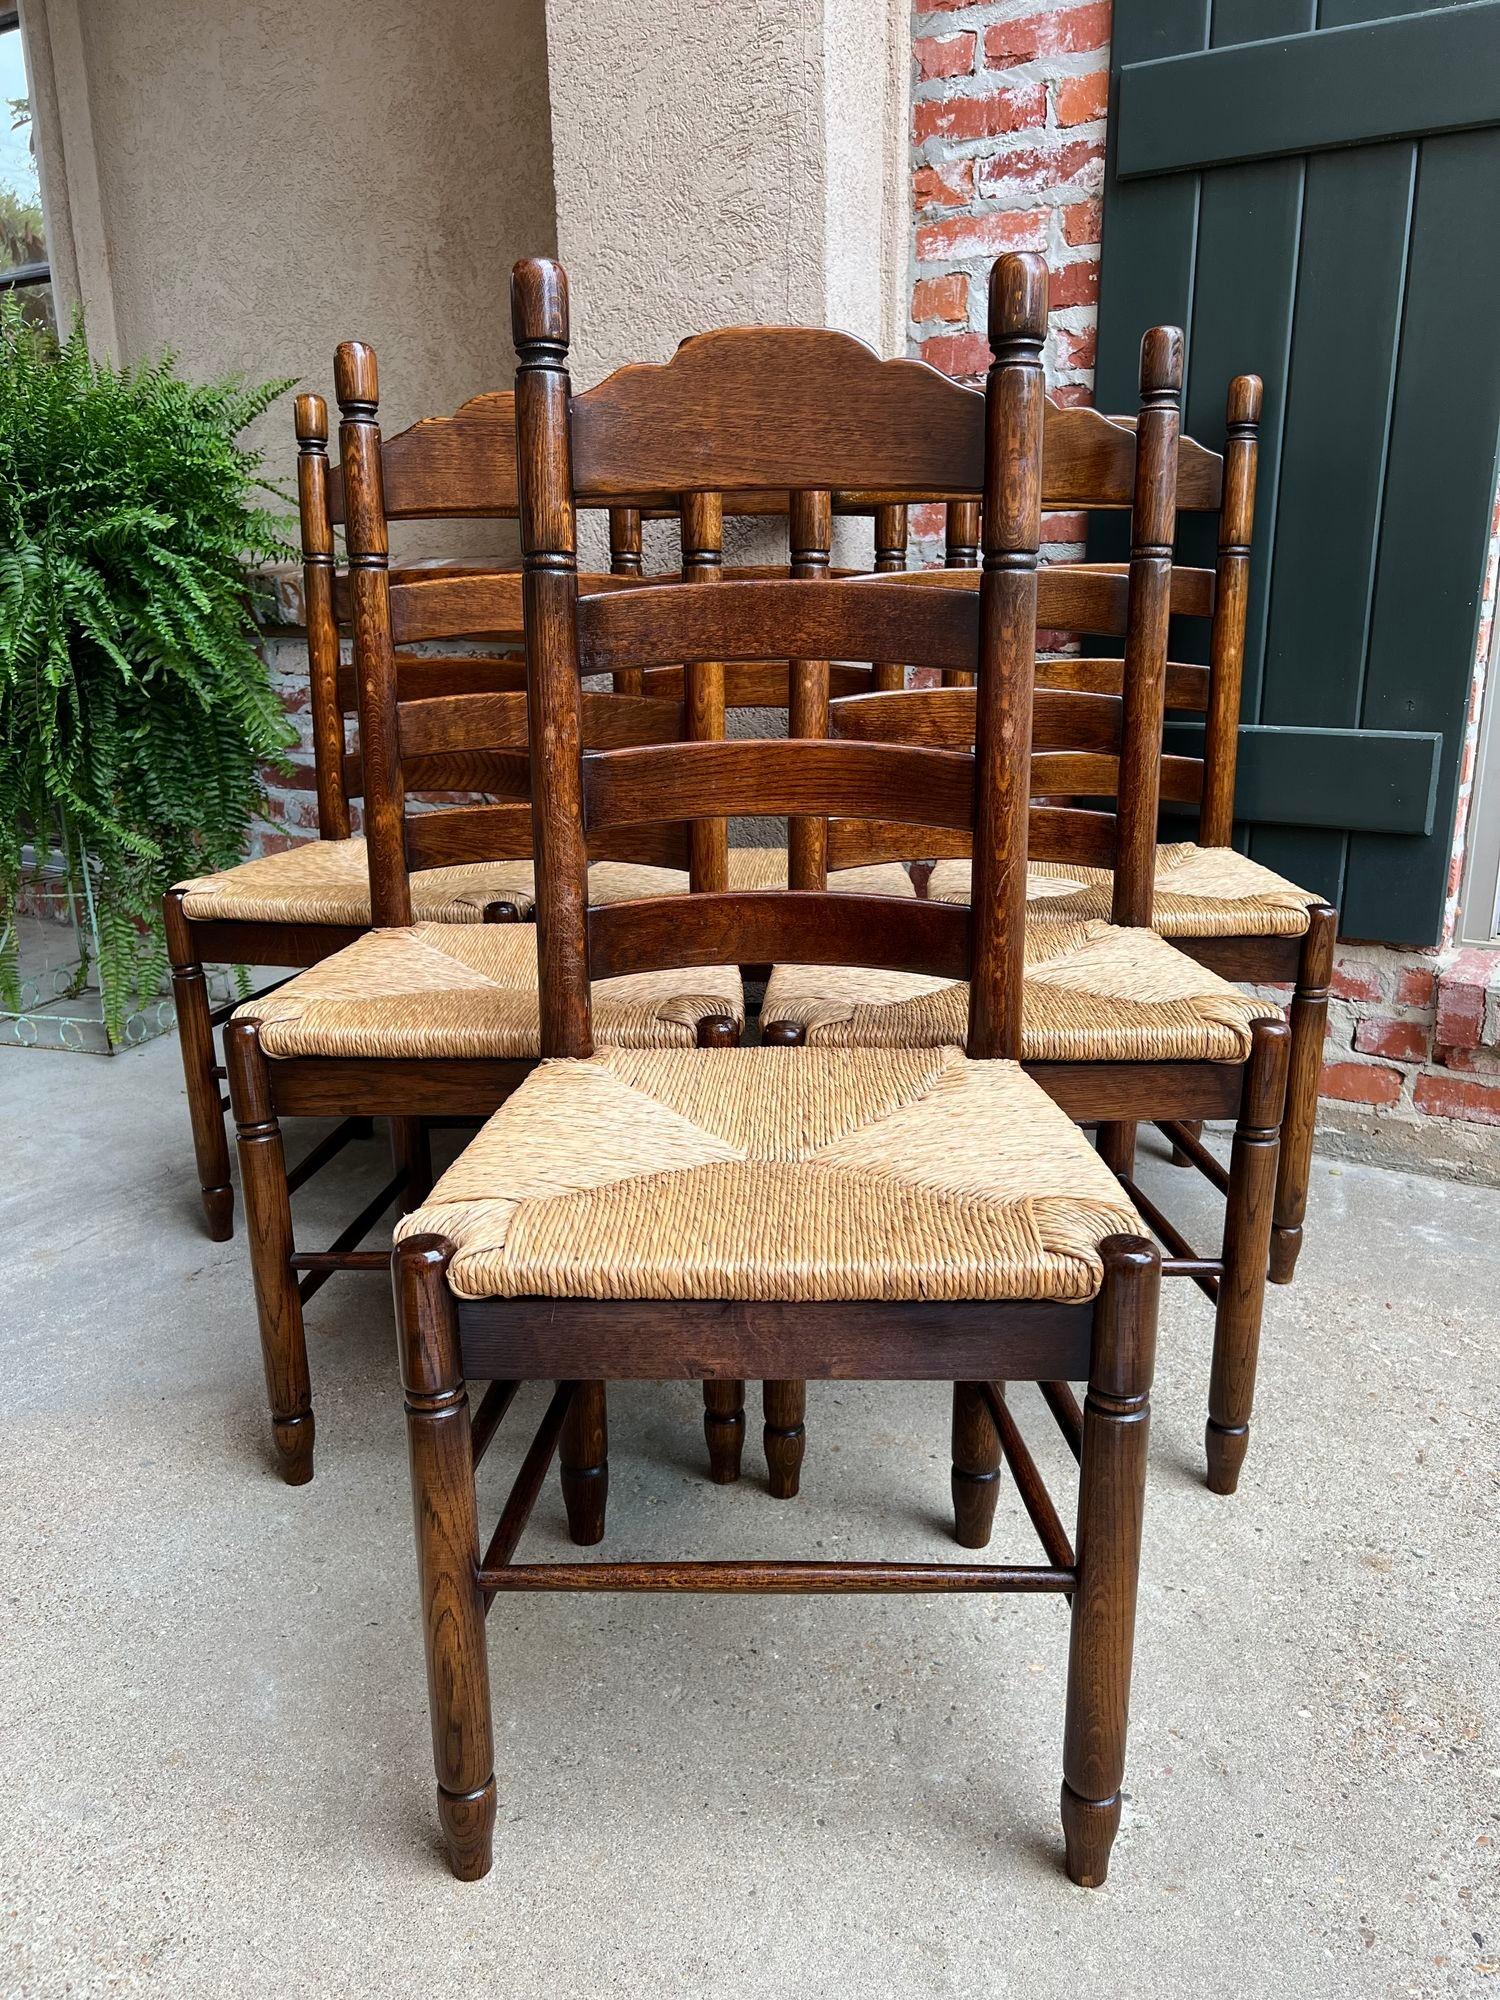 Set 6 antique French ladder back dining chairs carved oak rush seat country.

Direct from France, a lovely set of 6 antique French chairs, perfect for either a dining room or kitchen with their Classic French Country charm. The chairs have a